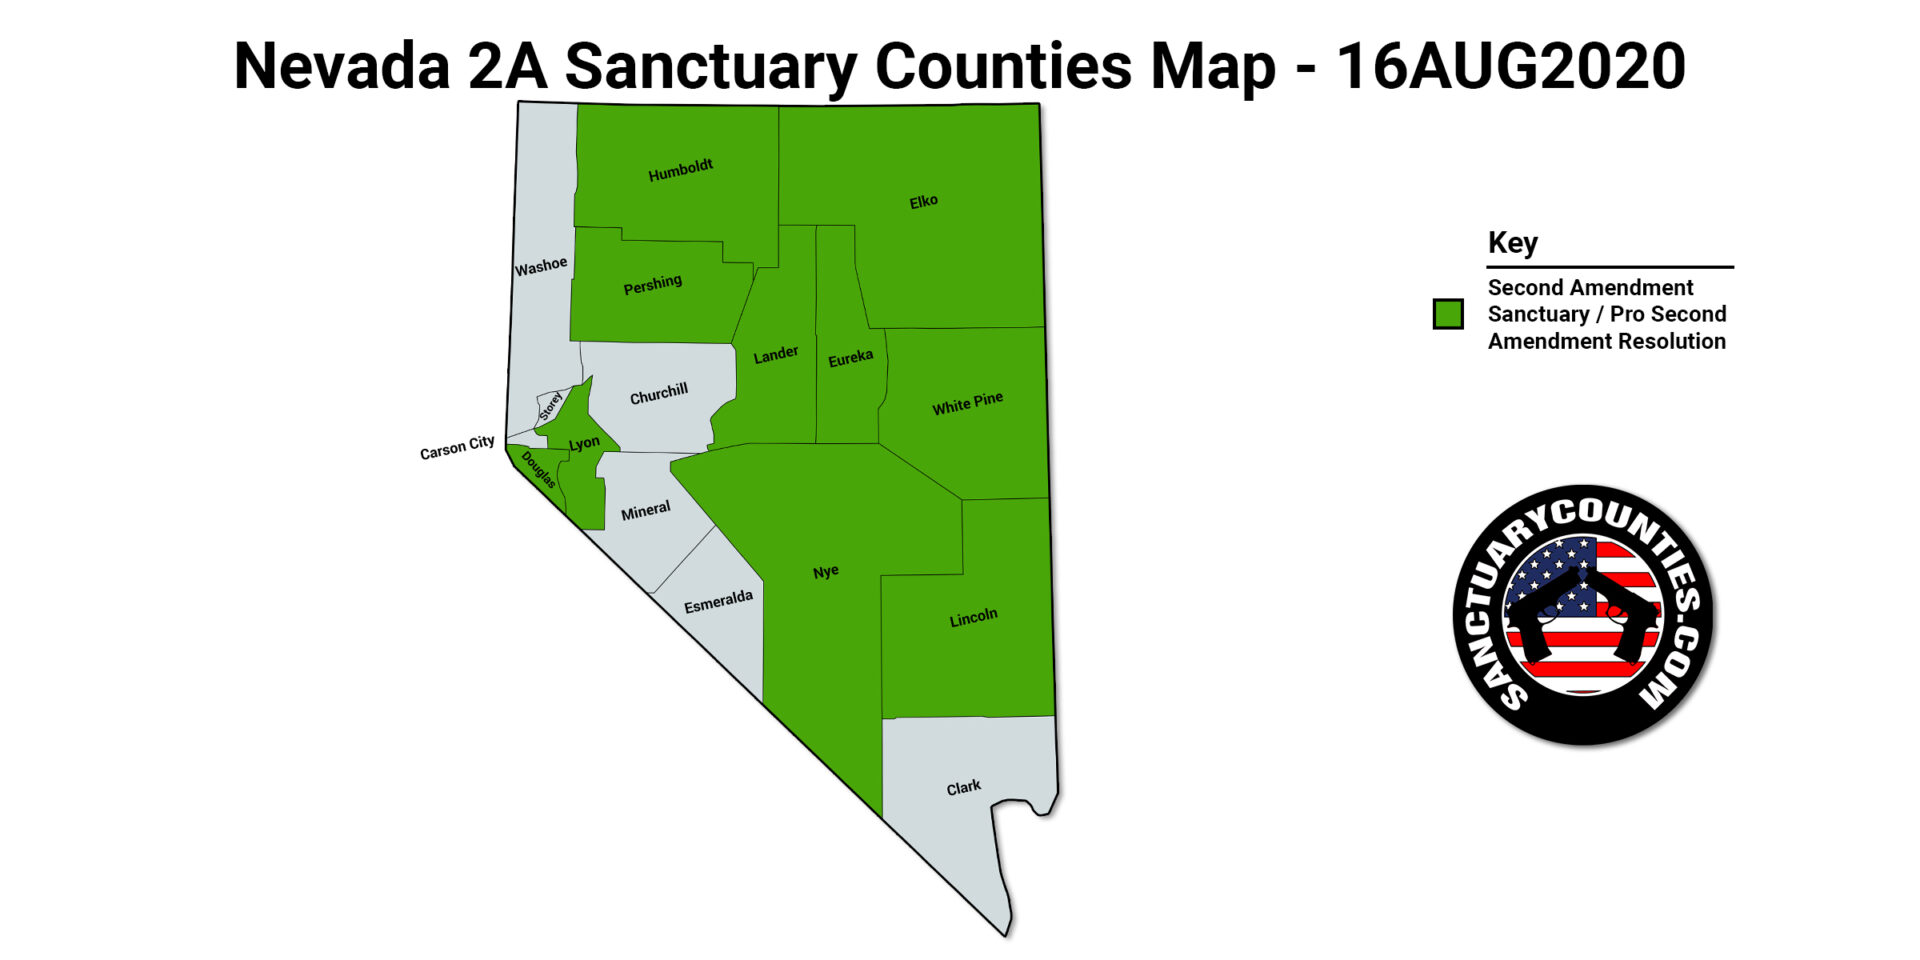 Nevada 2A Sanctuary Counties Map